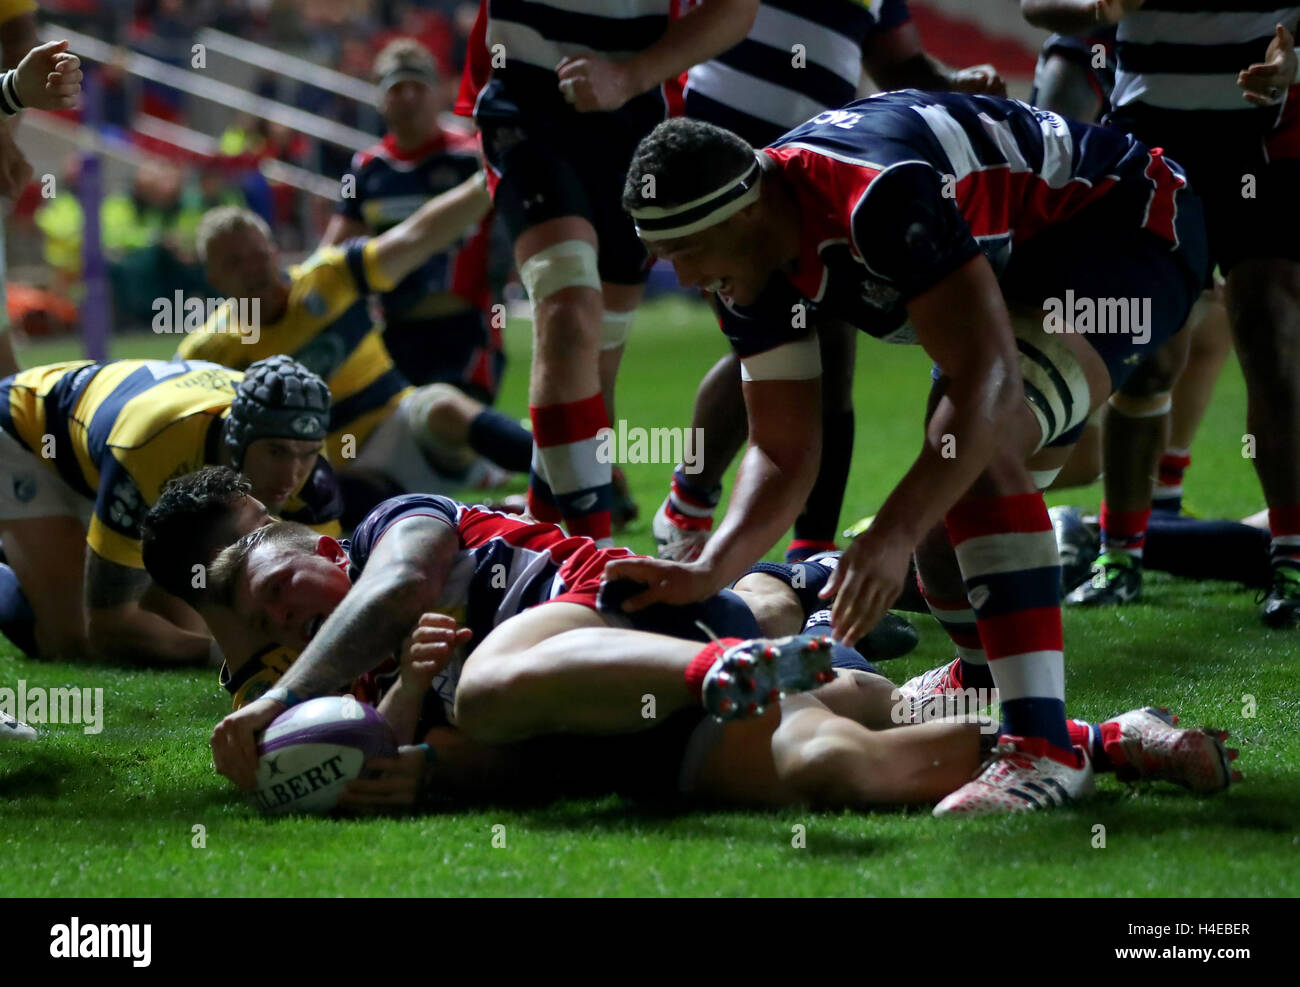 Bristol Rugby's Max Crumpton dives in to score his sides first try the European Challenge Cup, pool four match at Ashton Gate Stadium, Bristol. PRESS ASSOCIATION Photo. Picture date: Friday October 14, 2016. See PA story RUGBYU Bristol. Photo credit should read: Simon Cooper/PA Wire Stock Photo